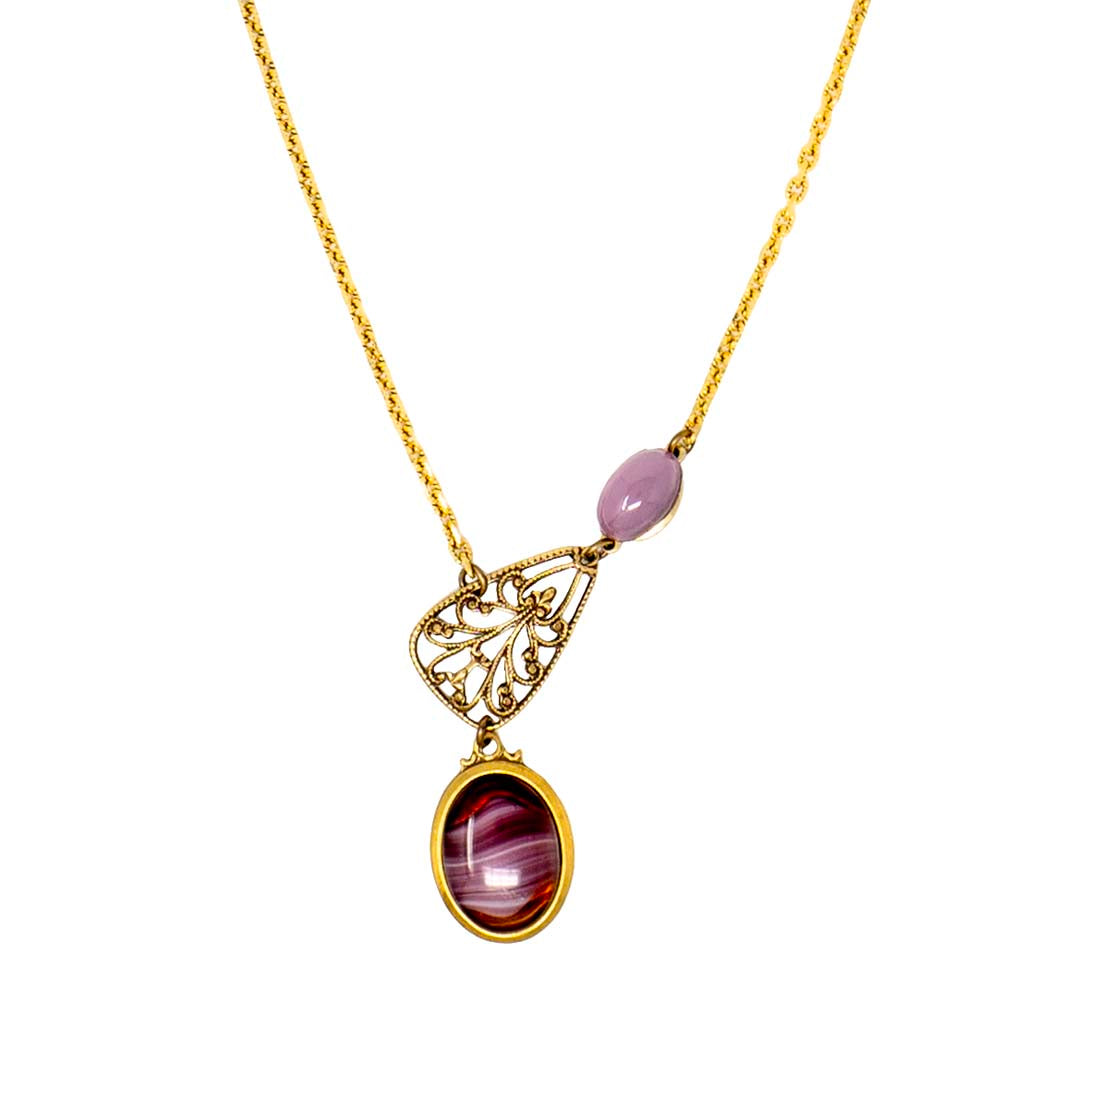 Ione Violet Agate Necklace